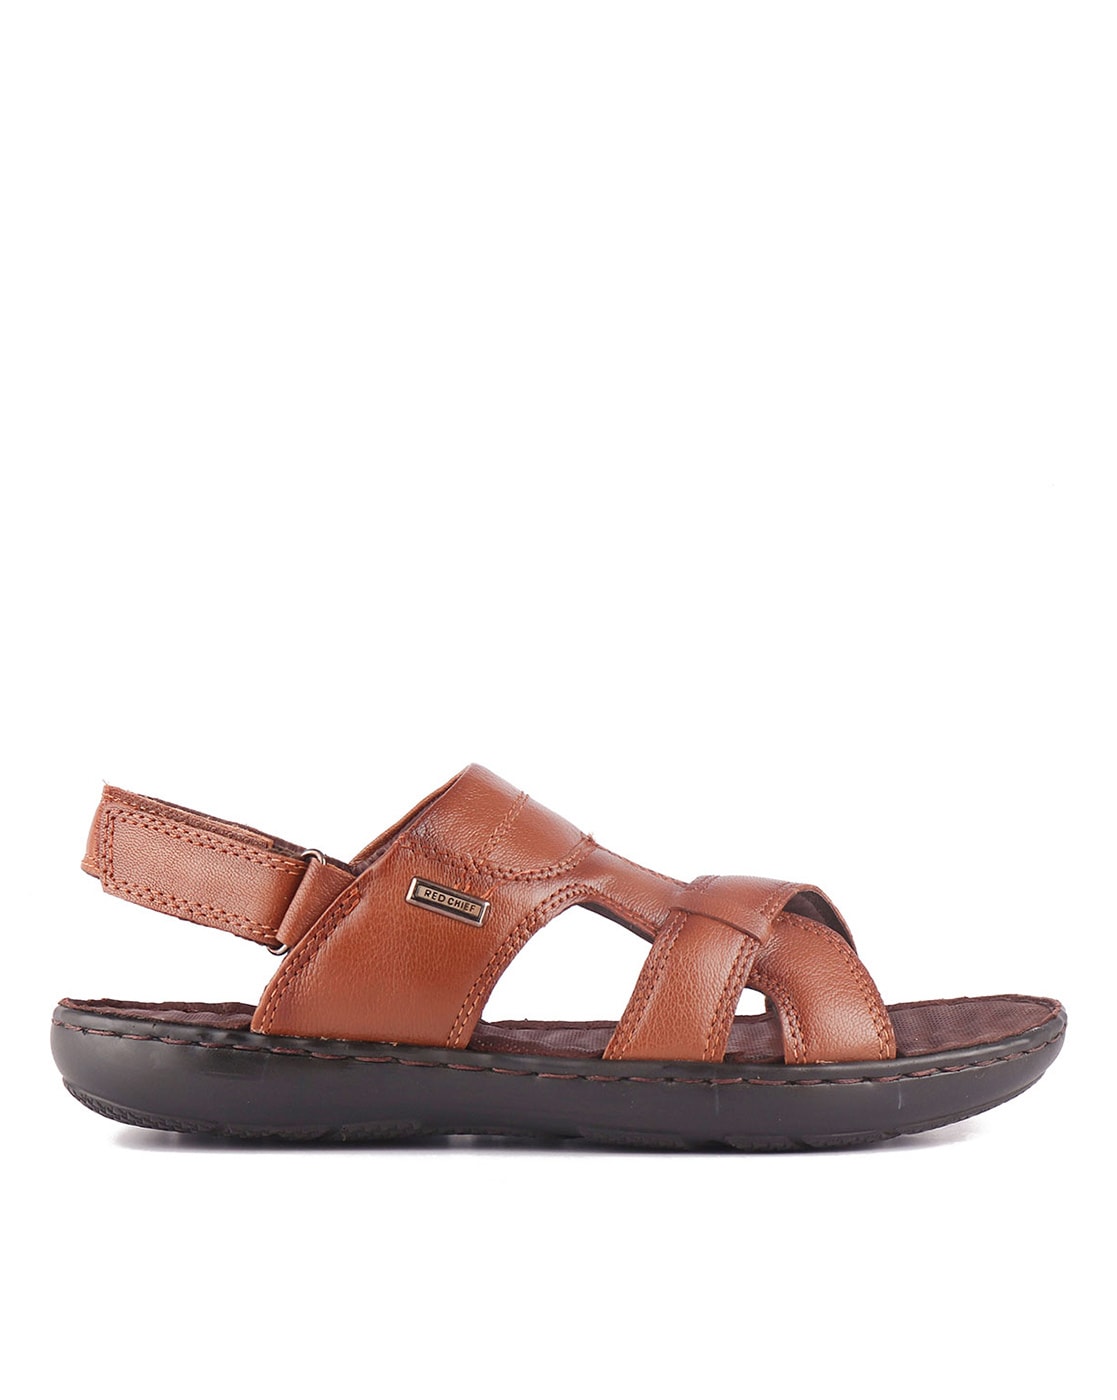 Buy Red Chief Red Chief Men Rust Leather Comfort Sandals at Redfynd